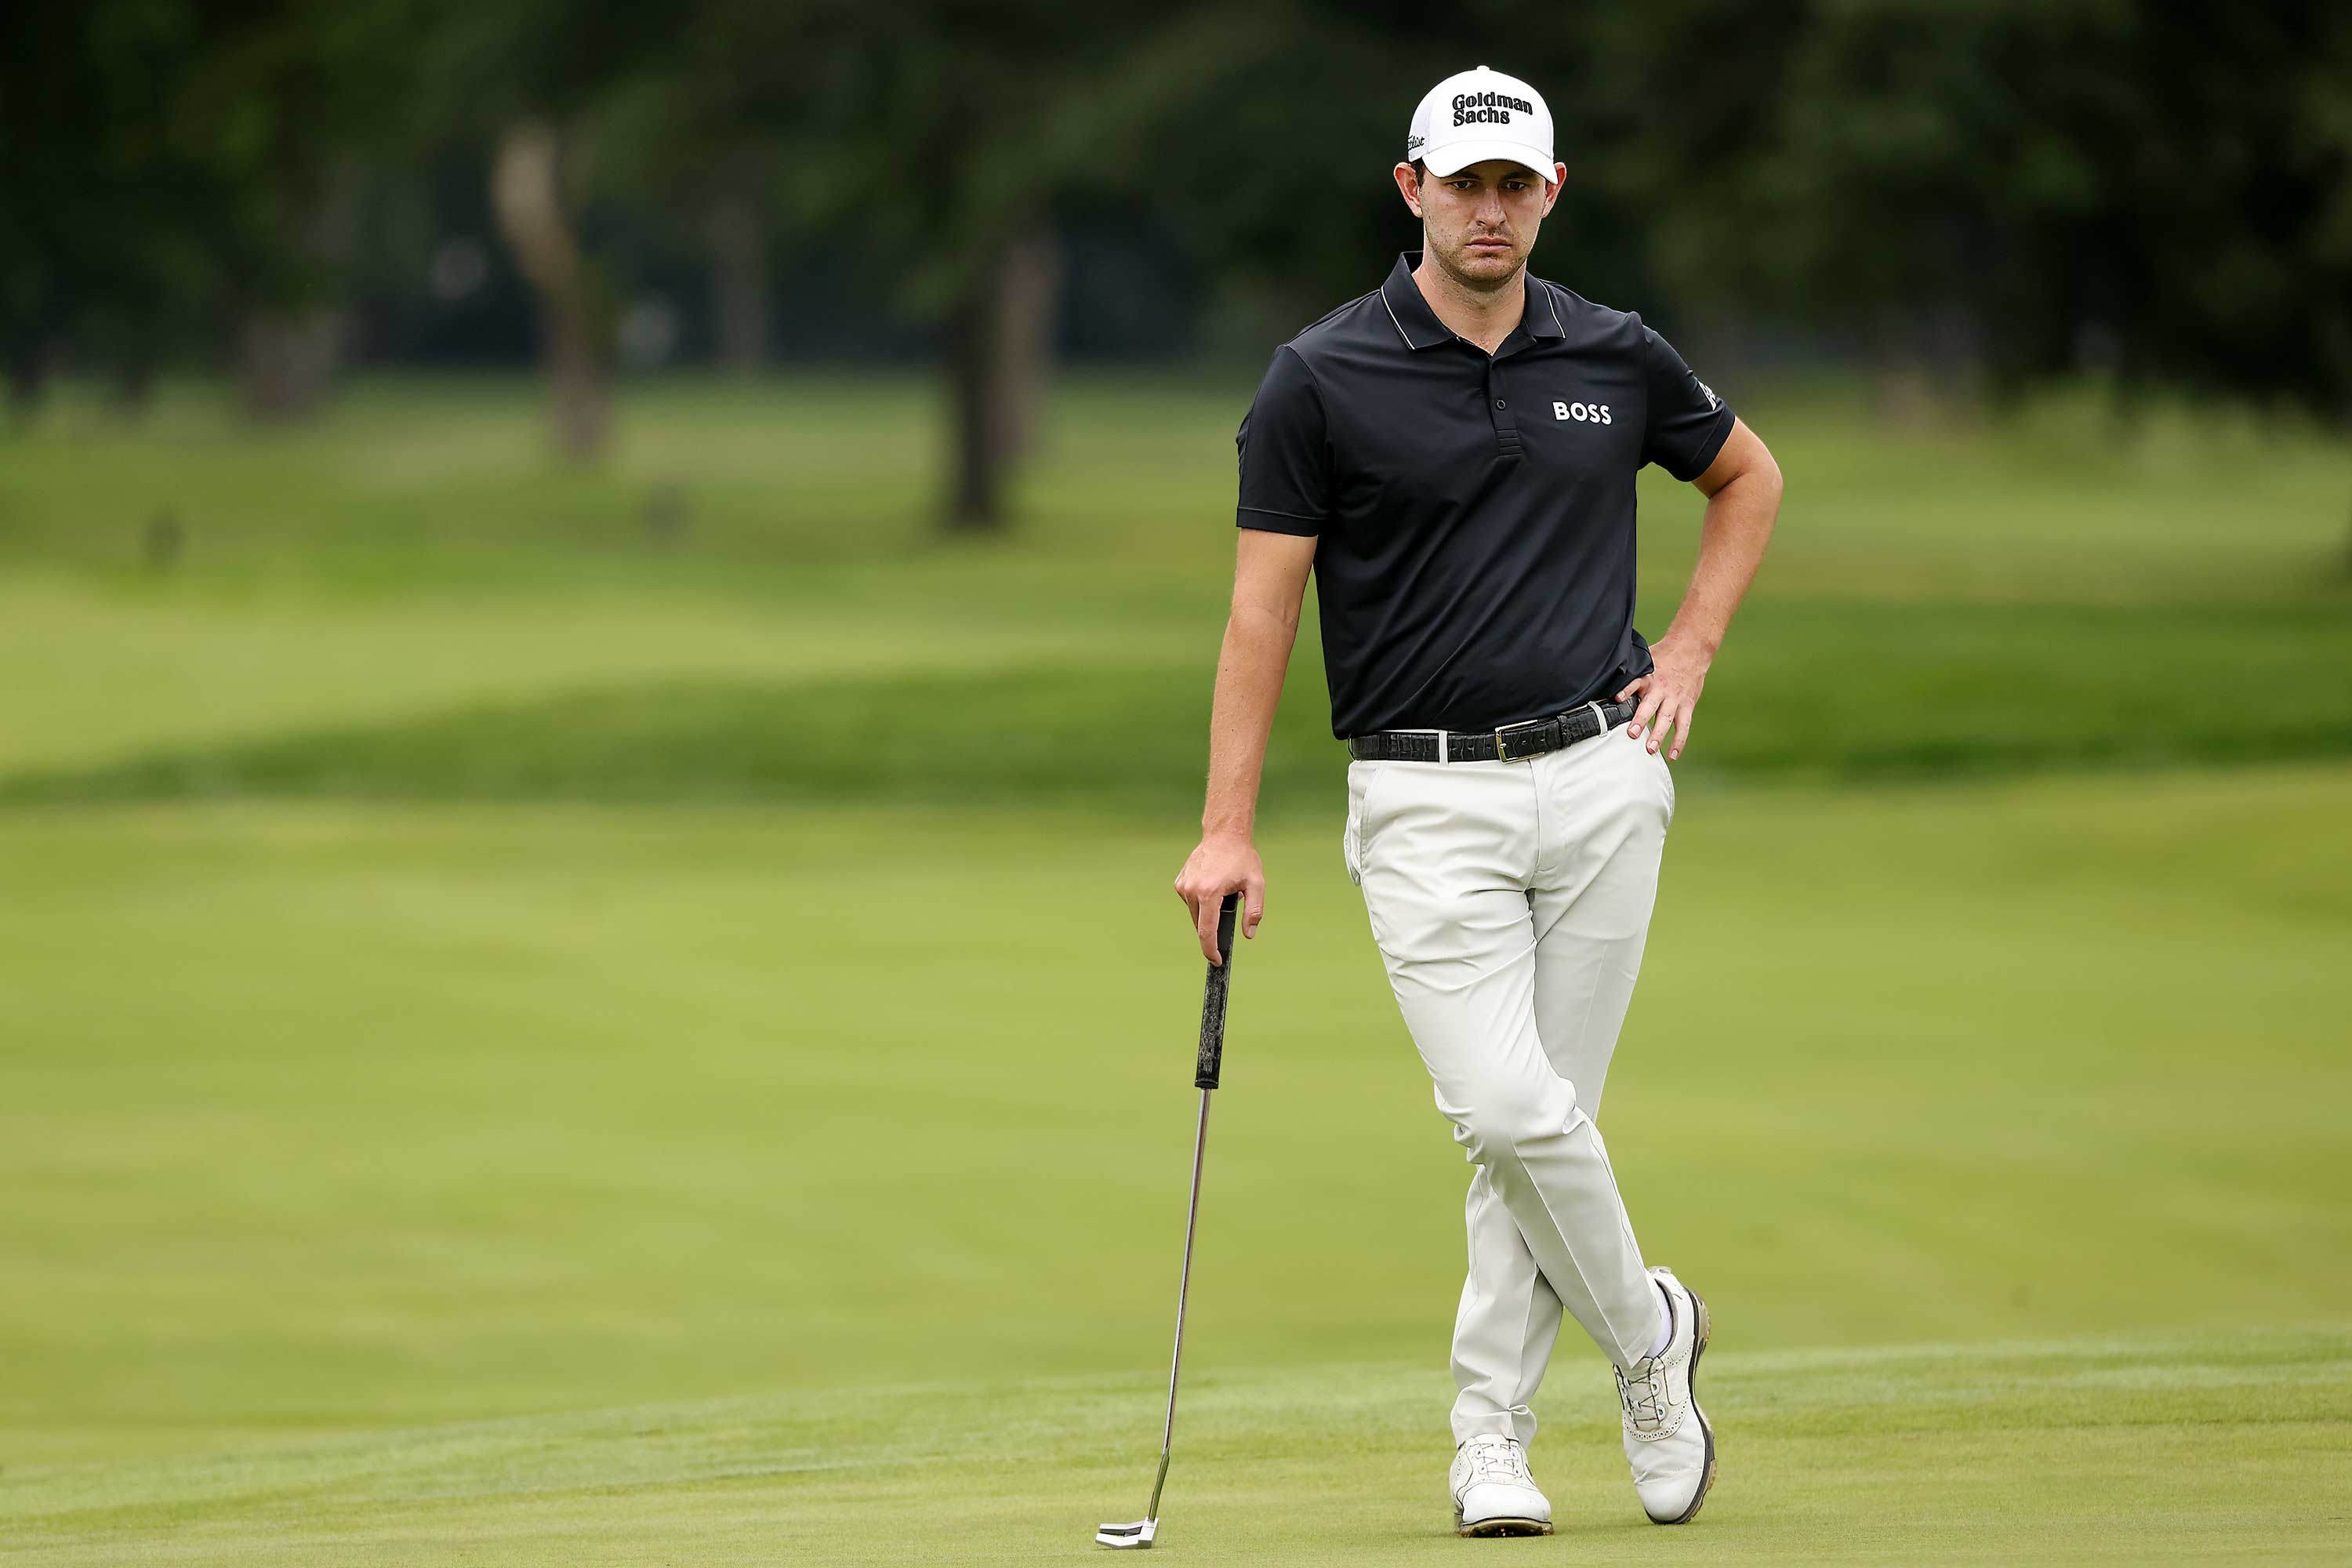 Patrick Cantlay and Goldman Sachs Part Ways, and LIV Rumors are Swirling